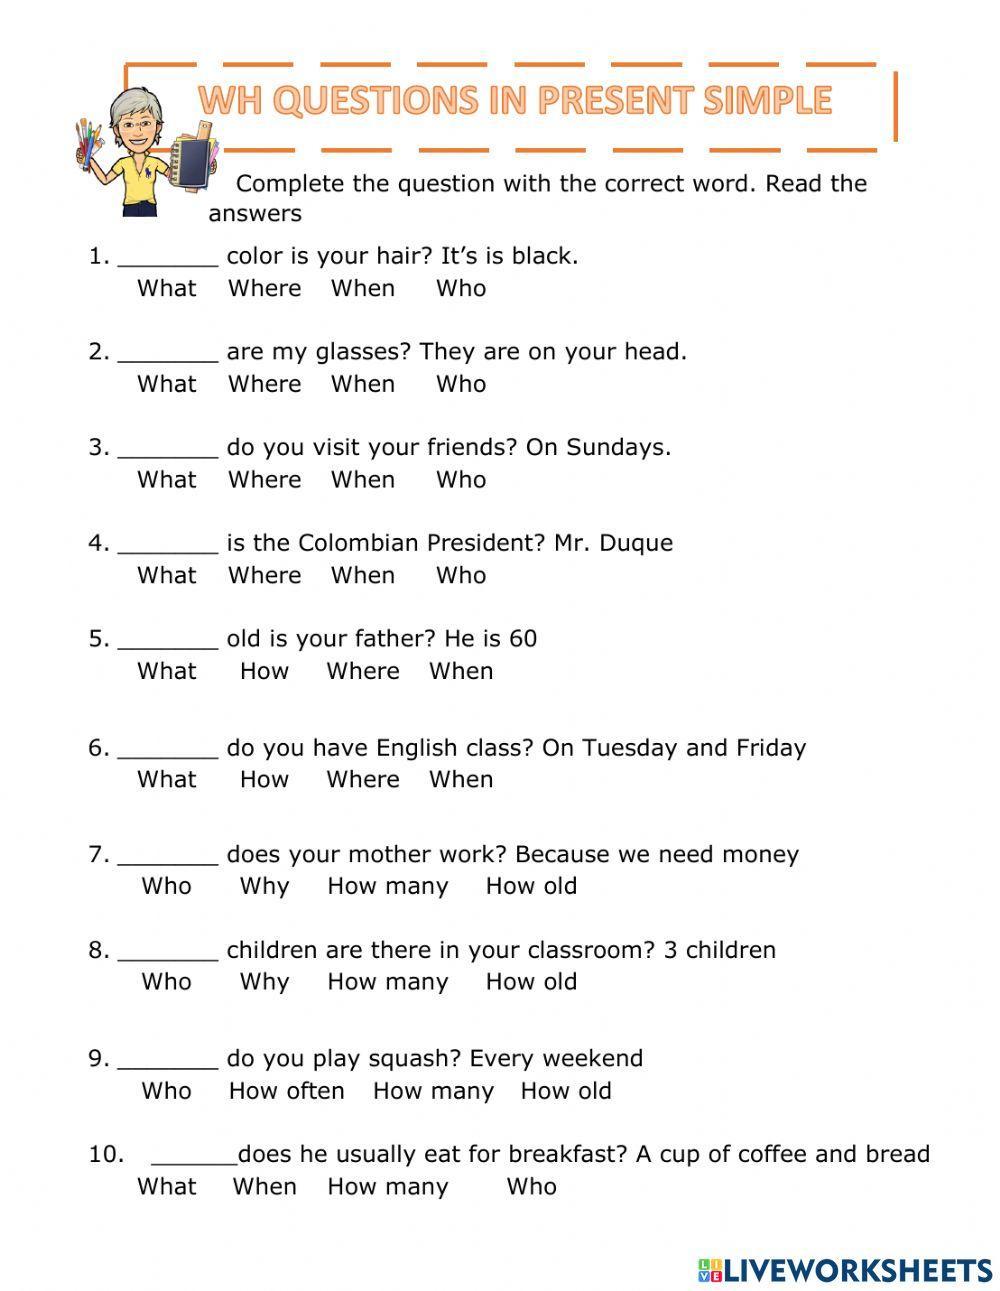 Wh-questions Worksheets For Kids - Your Home Teacher